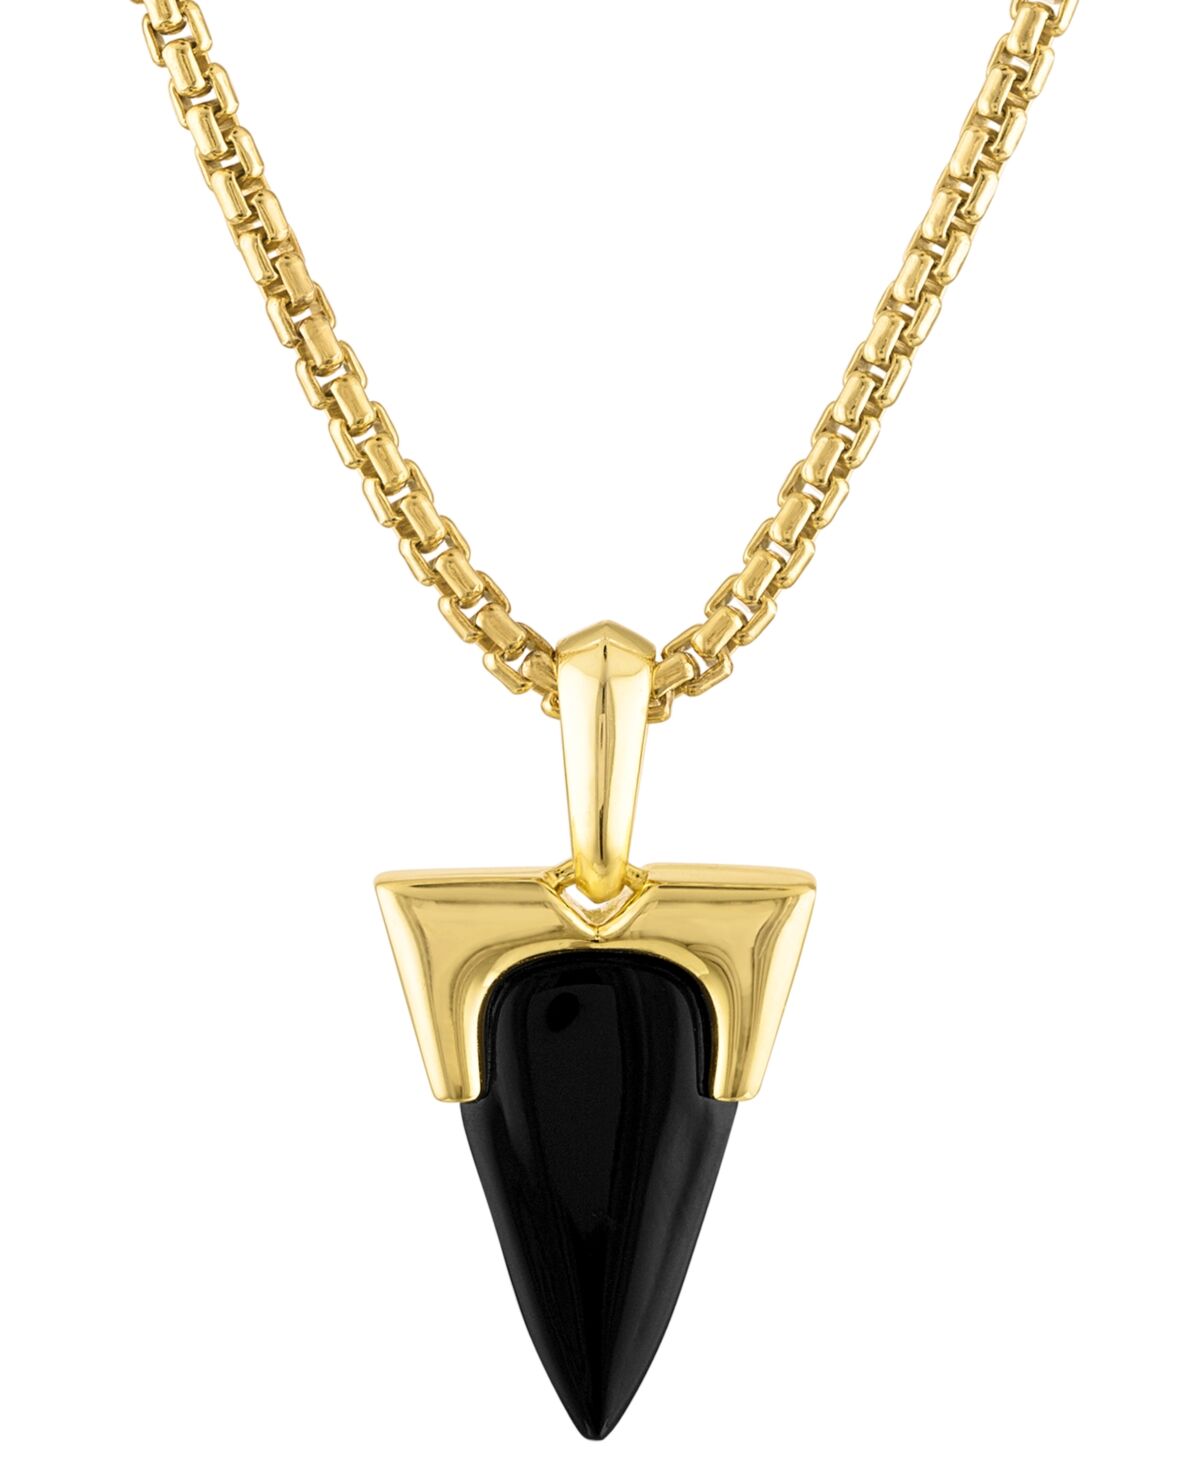 Bulova Men's Icon Black Onyx Pendant Necklace in 14k Gold-Plated Sterling Silver, 24